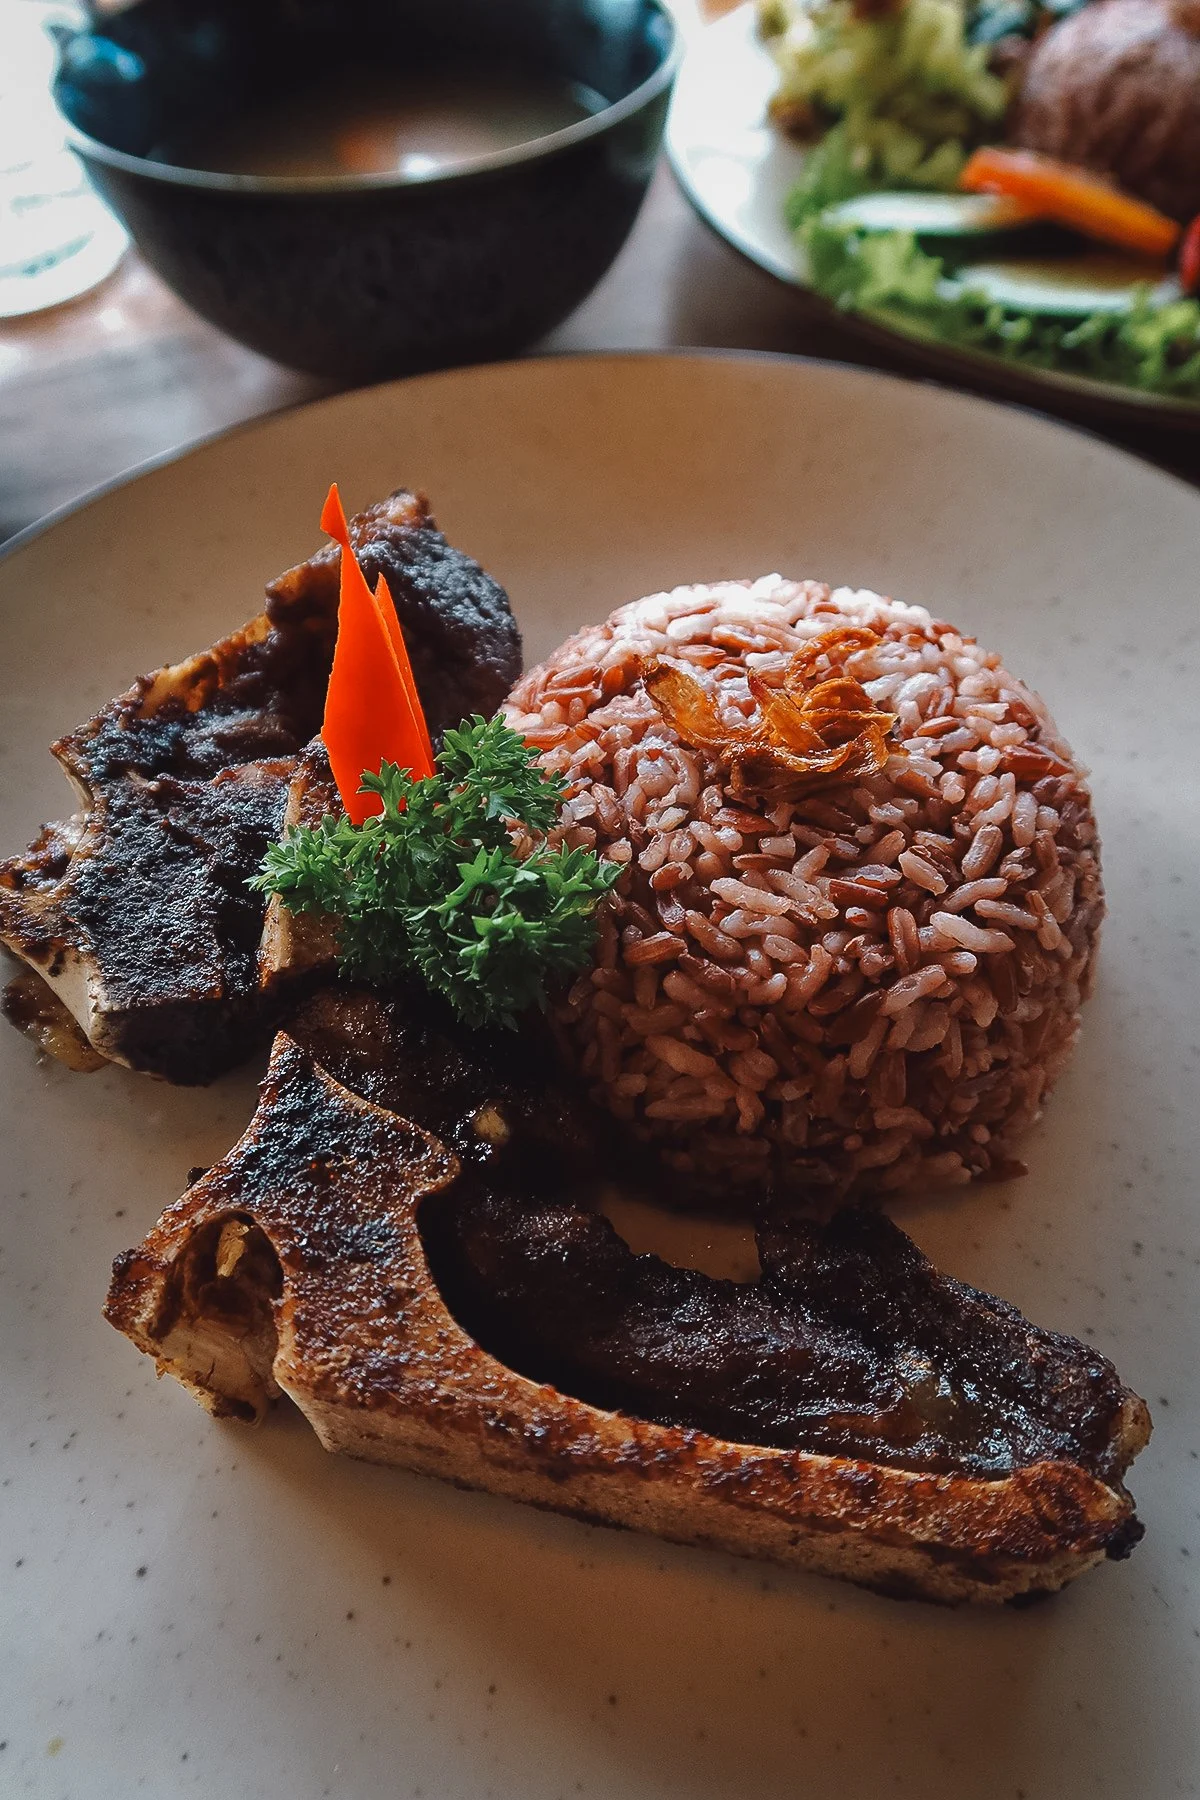 Grilled ox tail and rice at a restaurant in Ubud